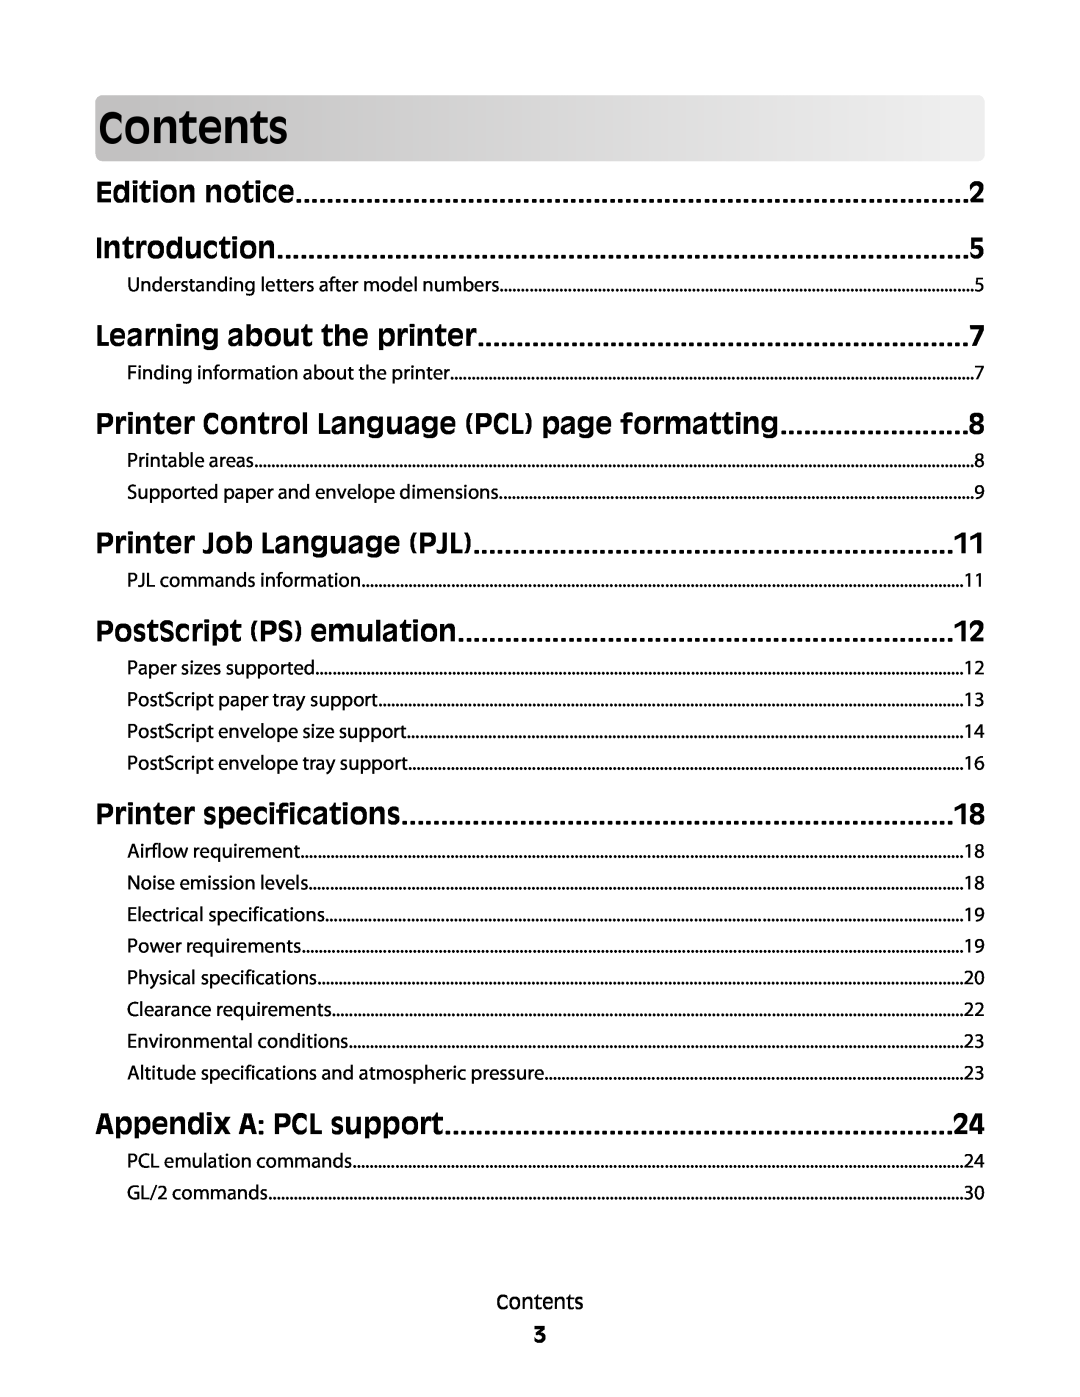 Lexmark X658 MFP manual Contents, Learning about the printer, Printer Control Language PCL page formatting, Edition notice 